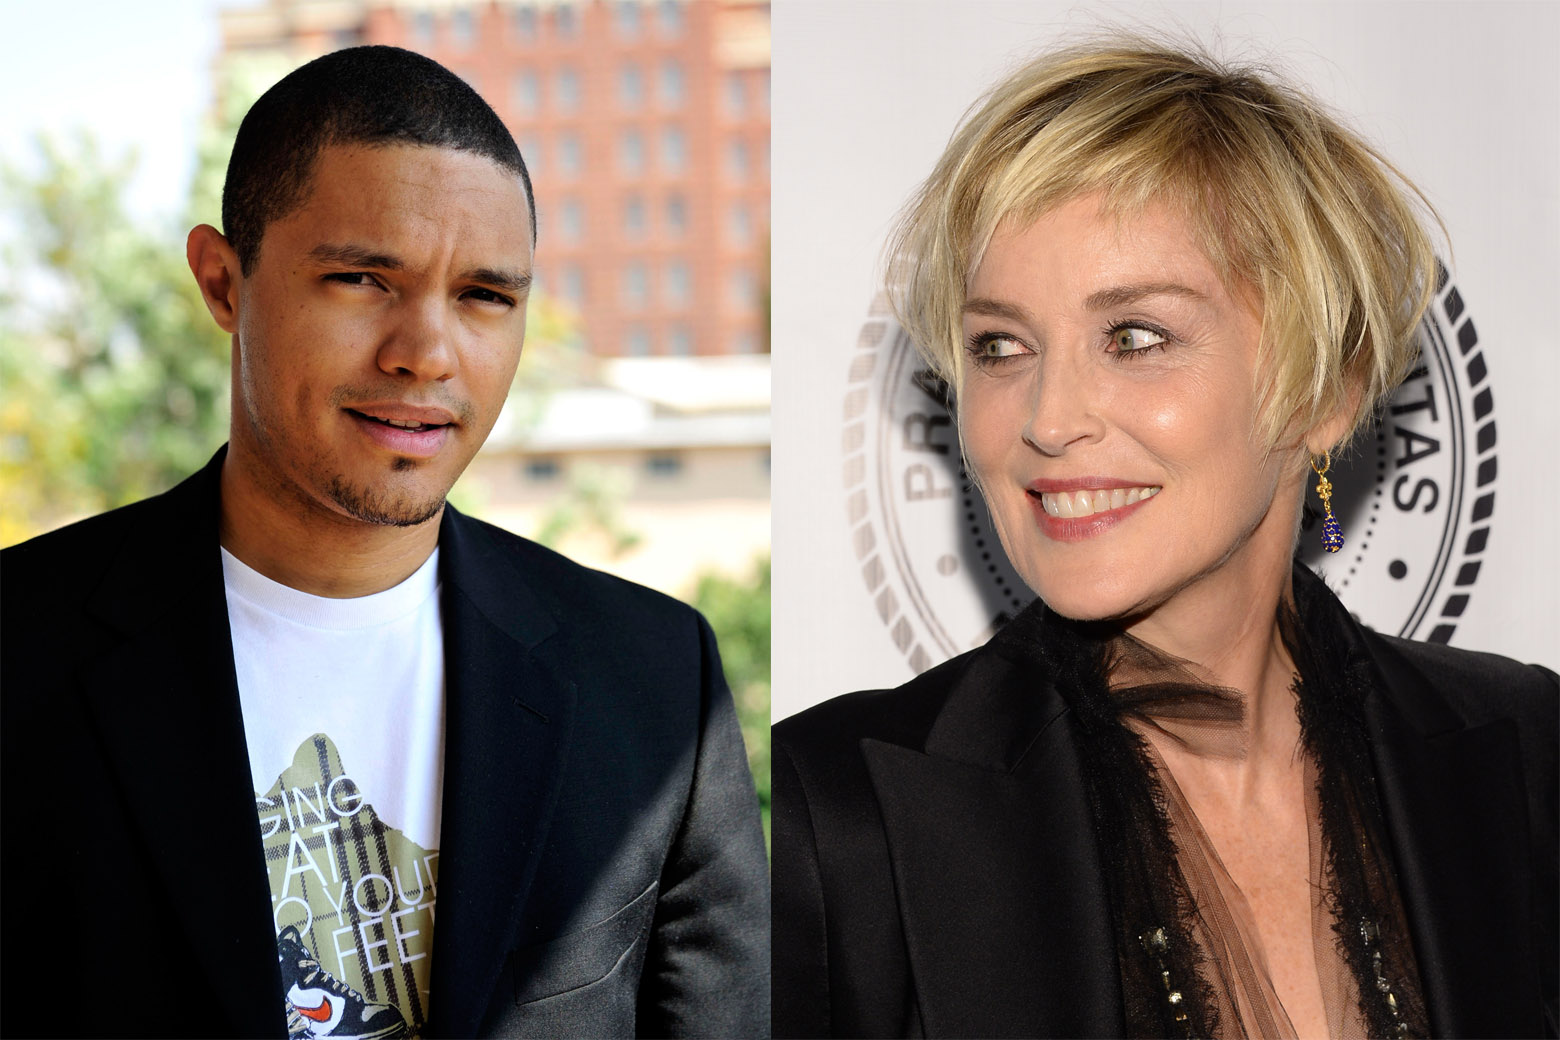 Trevor Noah, Sharon Stone make for a star-studded Saturday in the DC area